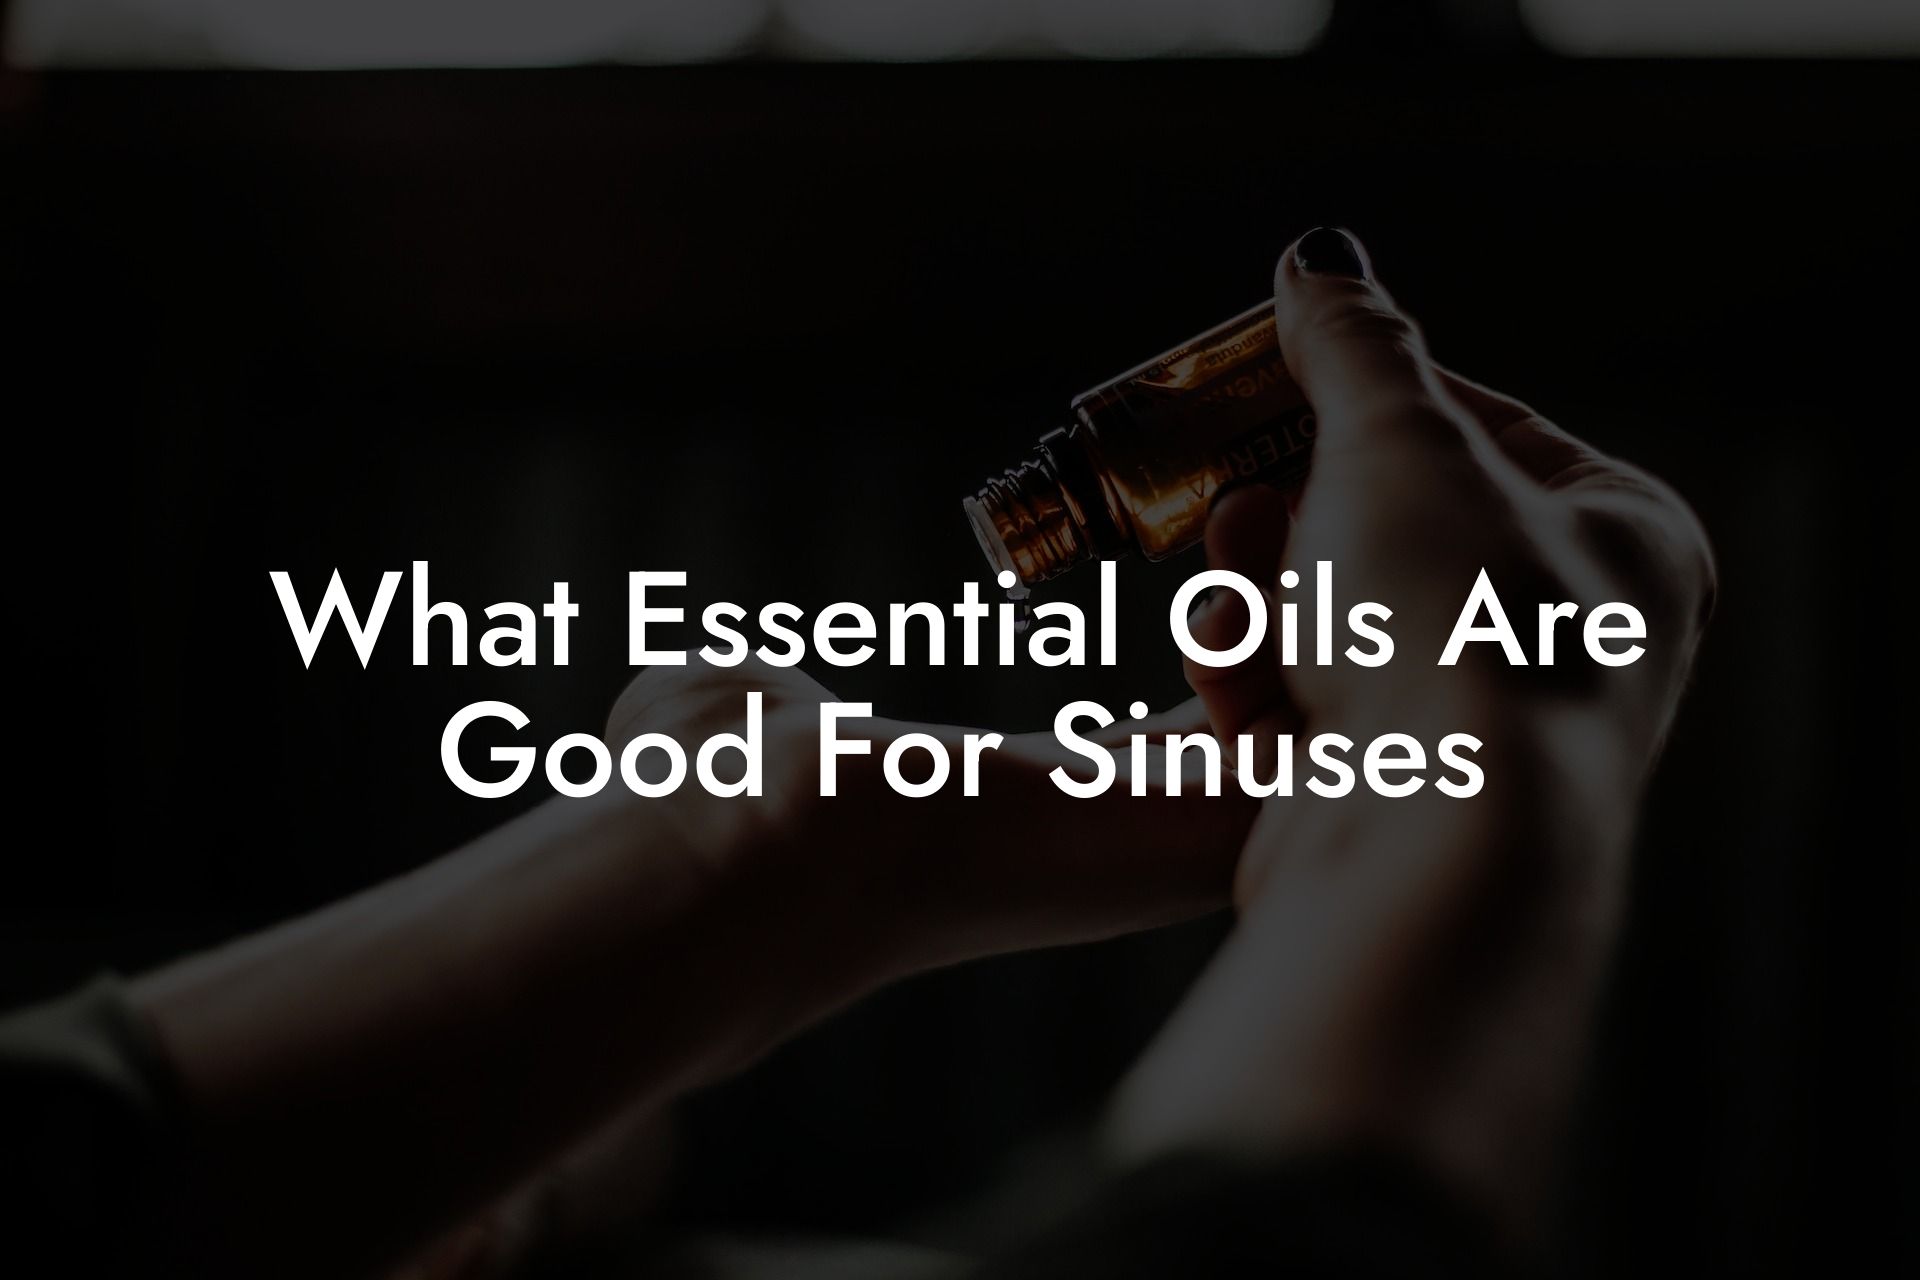 What Essential Oils Are Good For Sinuses